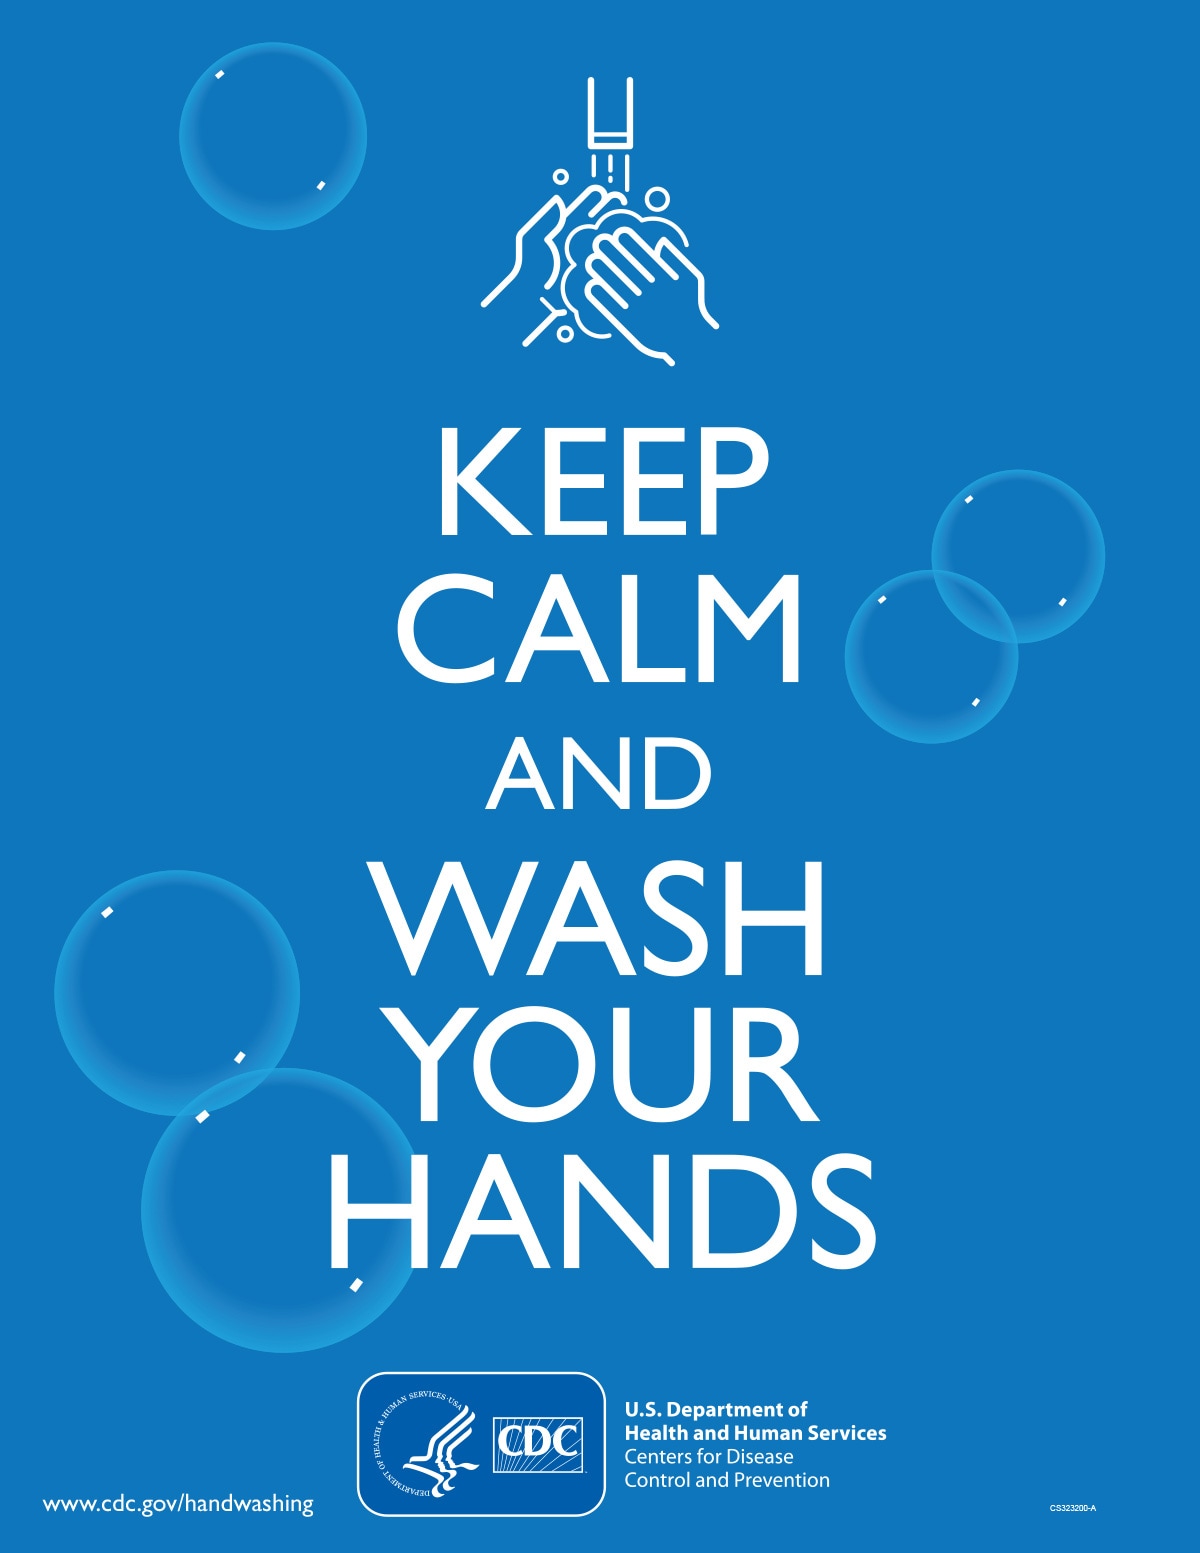 Keep calm and wash your hands poster